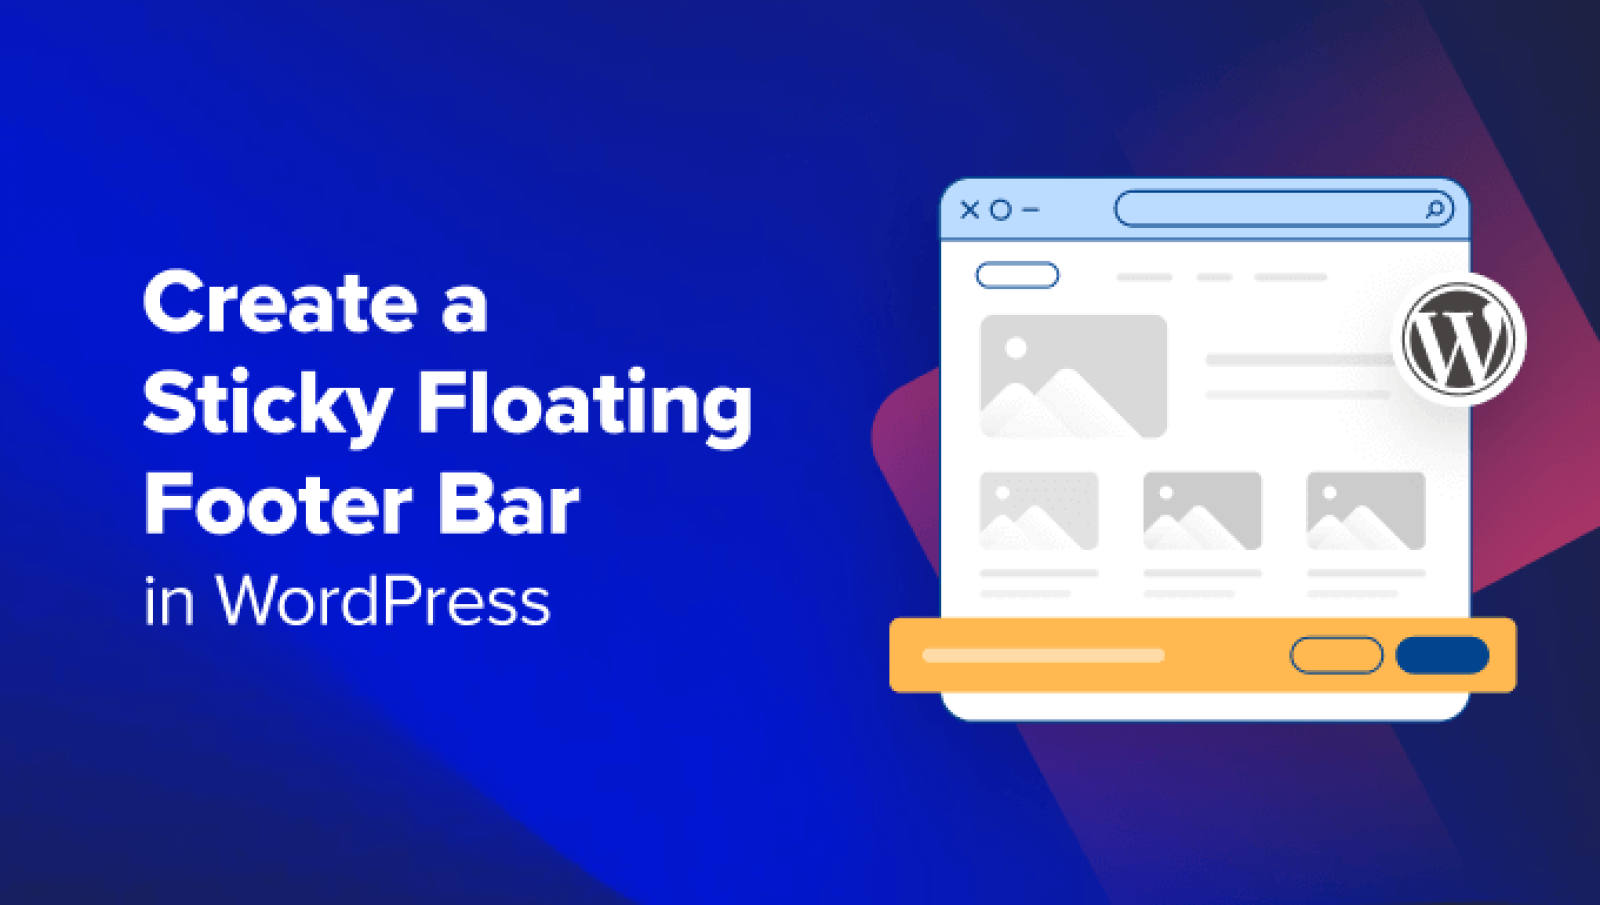 Methods to Create a “Sticky” Floating Footer Bar in WordPress